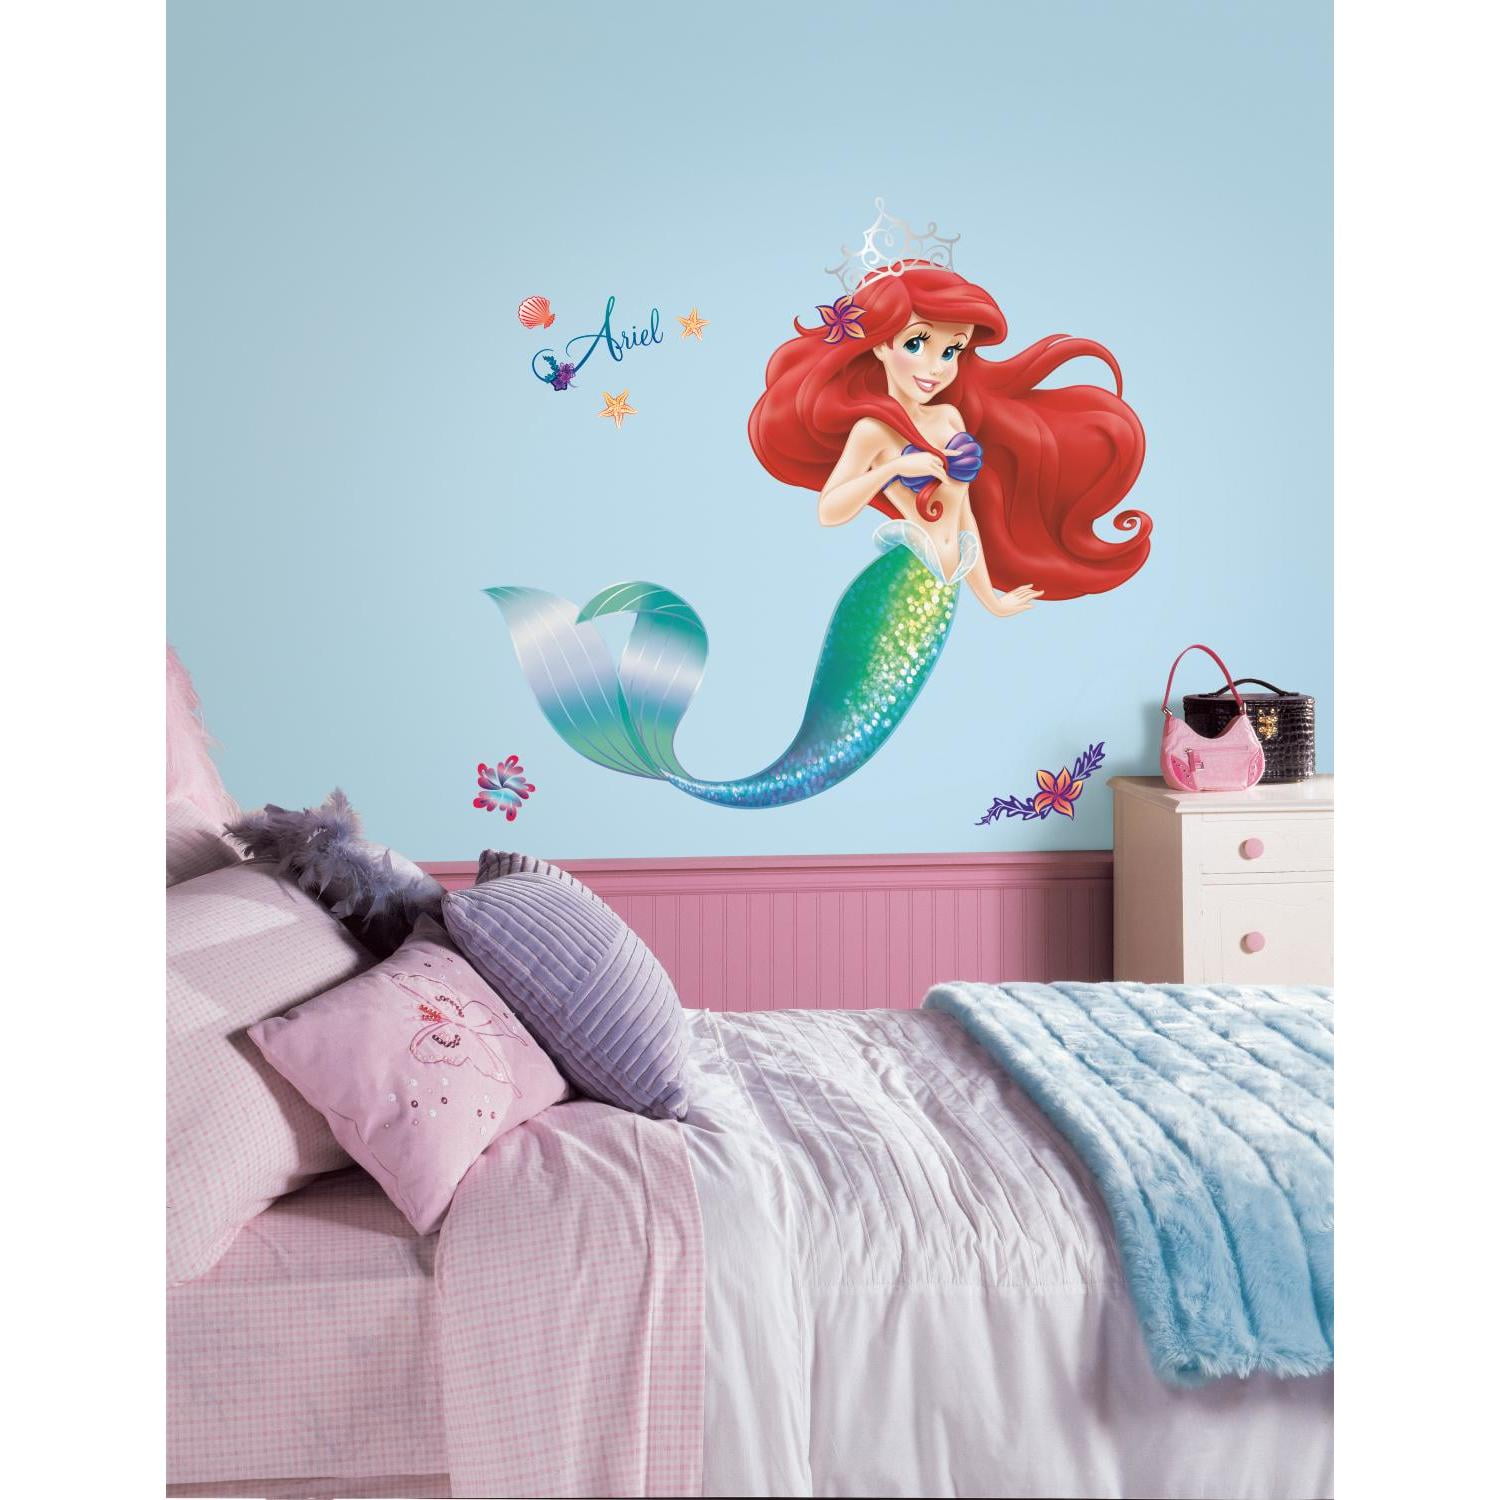 THE LITTLE MERMAID ARIEL  DISNEY PRINCESS  LOT OF STICKER WALL DECAL CHARACTERS 